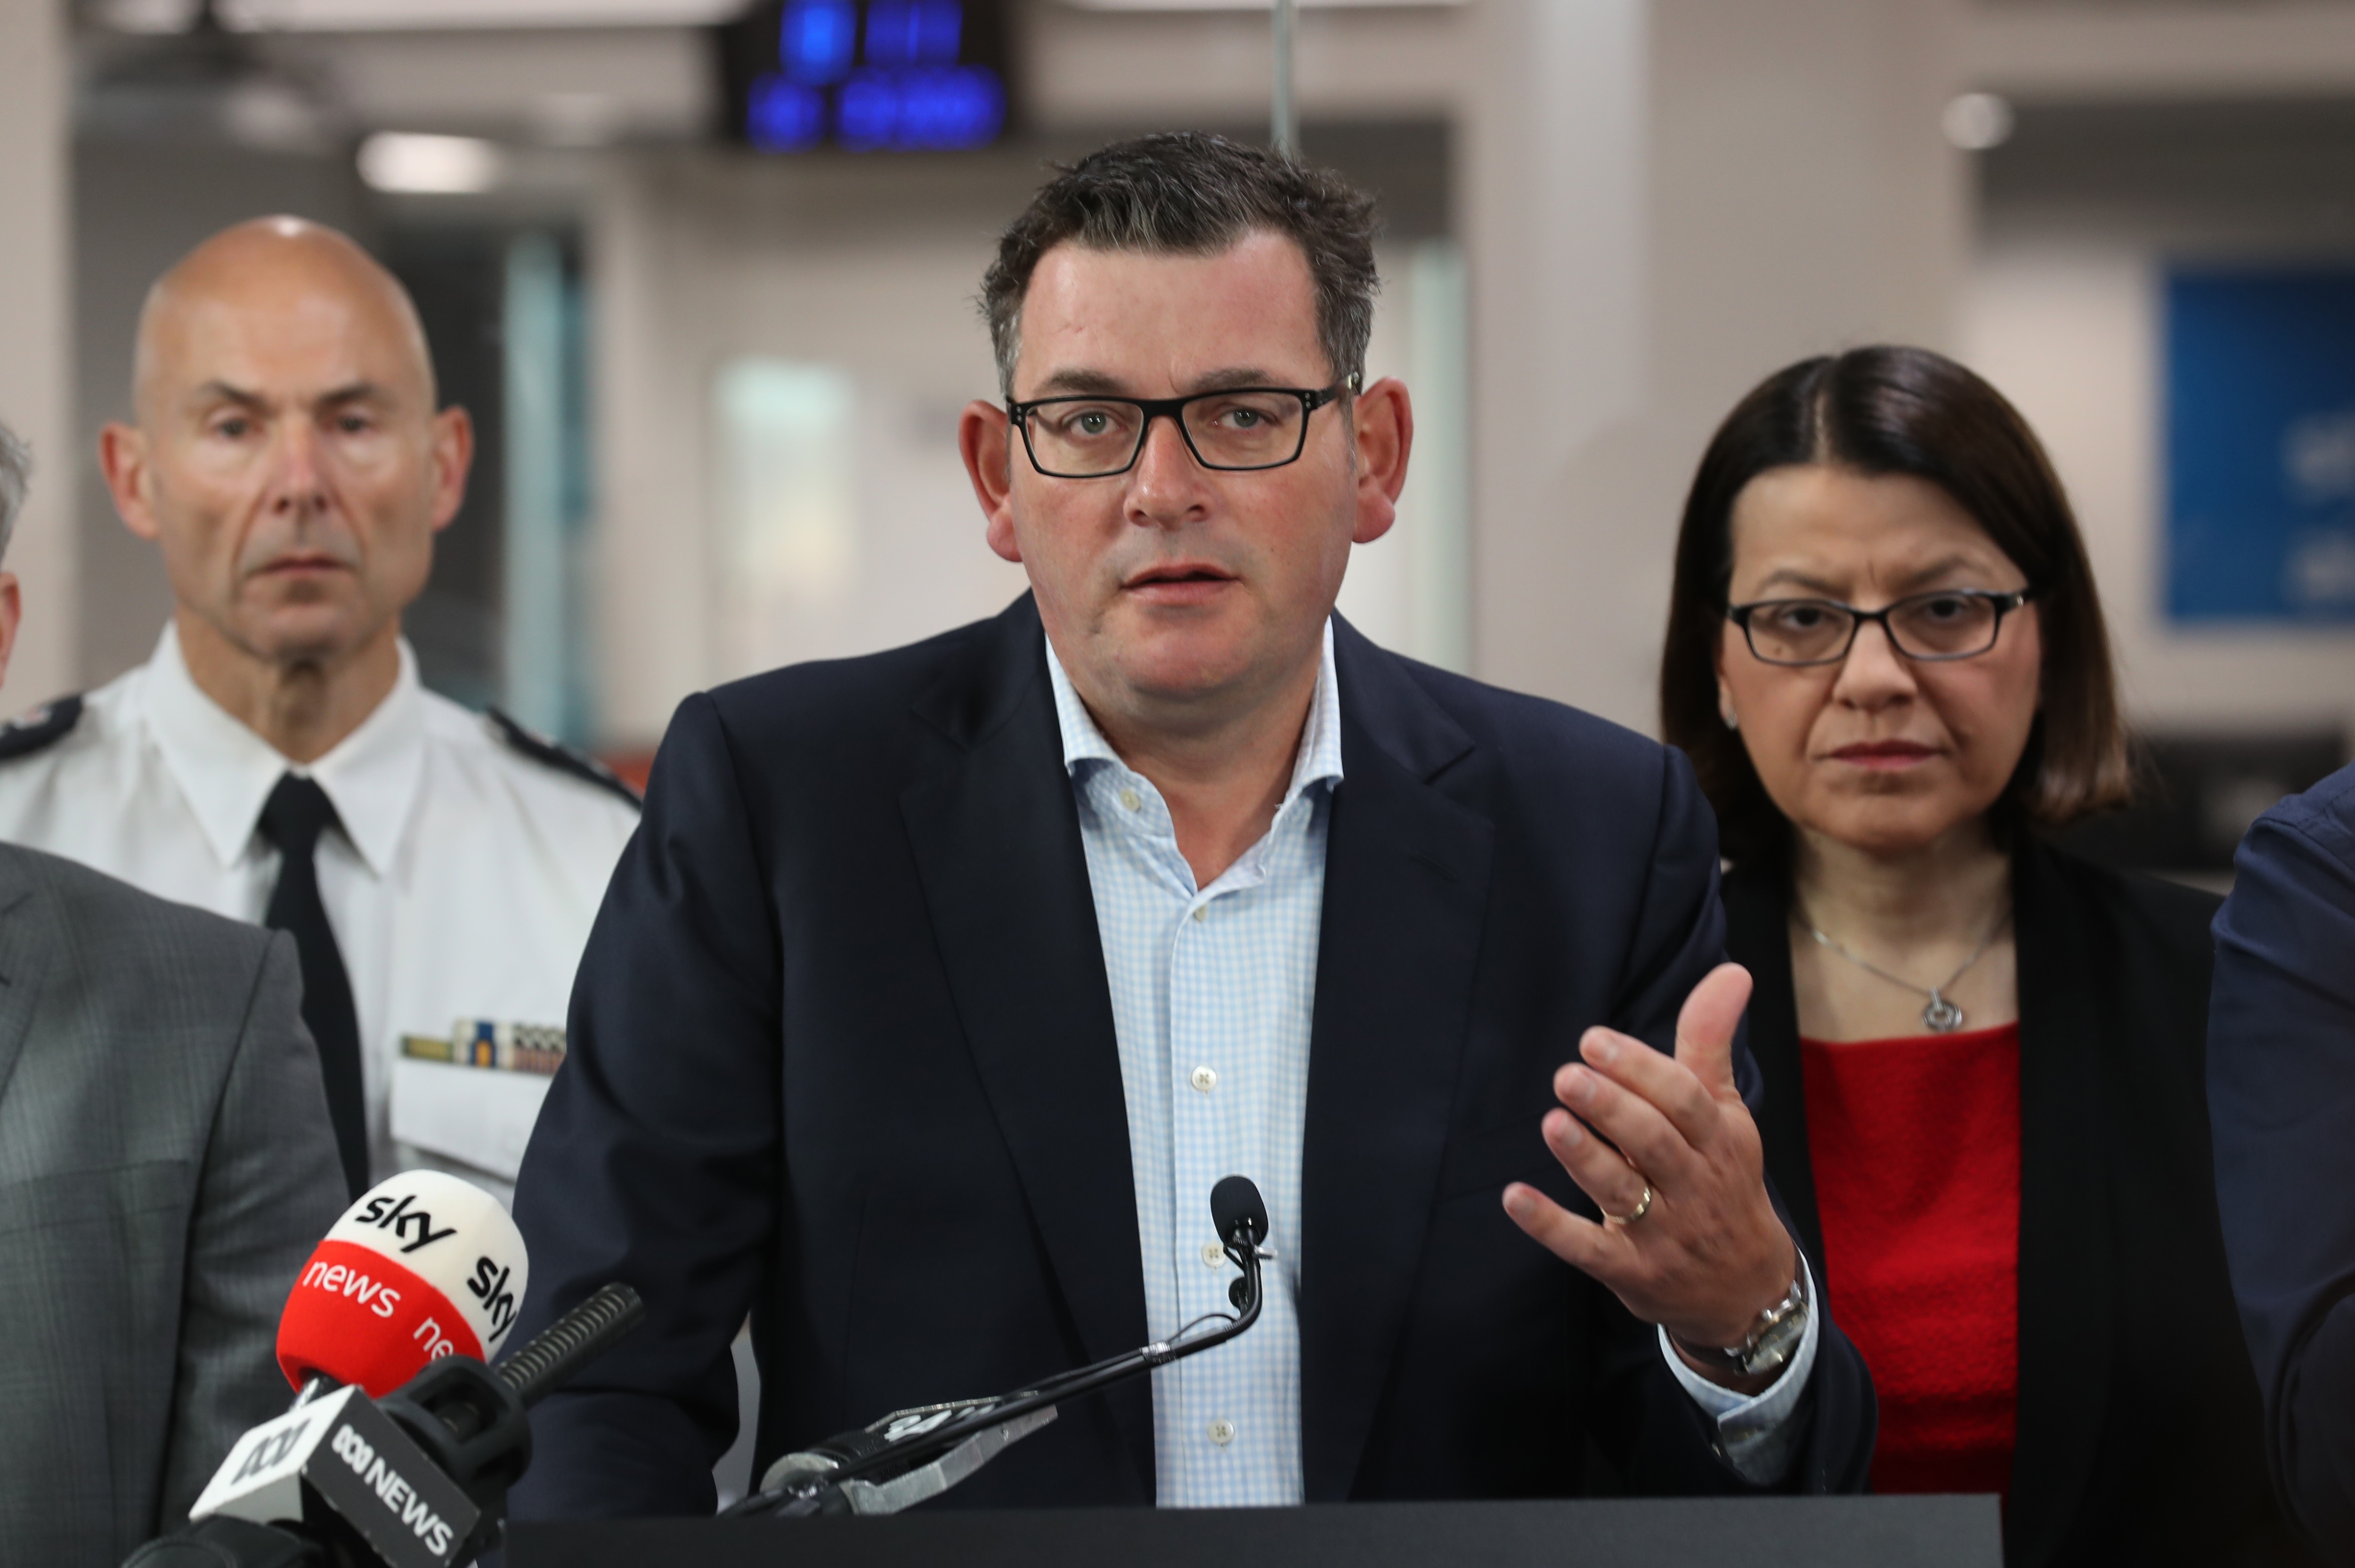 Victorian Premier Daniel Andrews speaks to the media during a press conference at the State Control Centre in Melbourne.